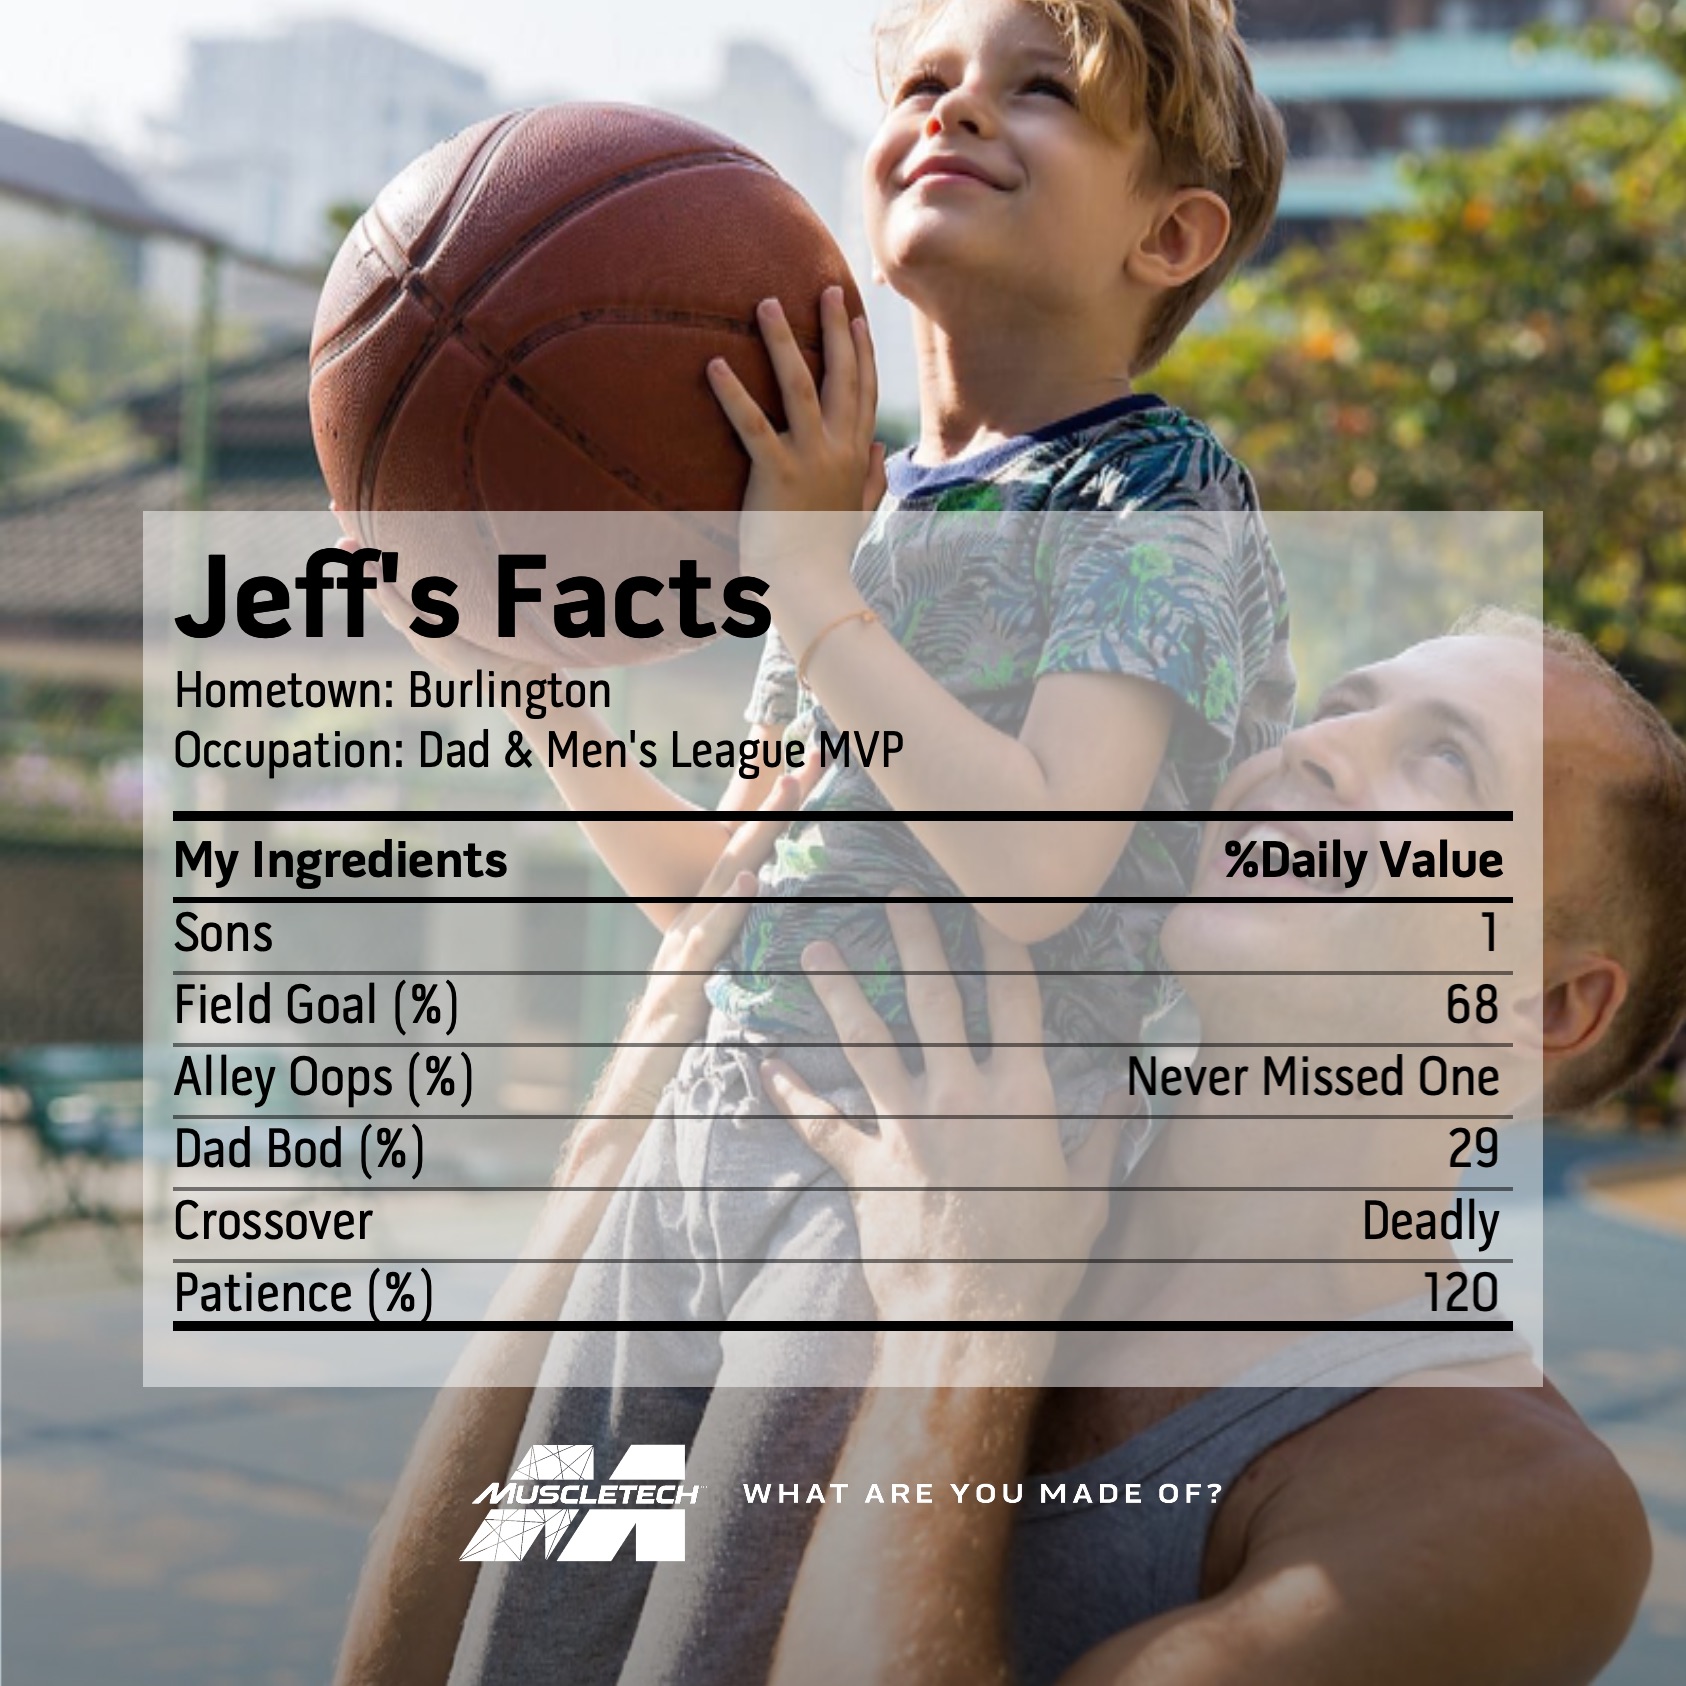 Jeff's Facts